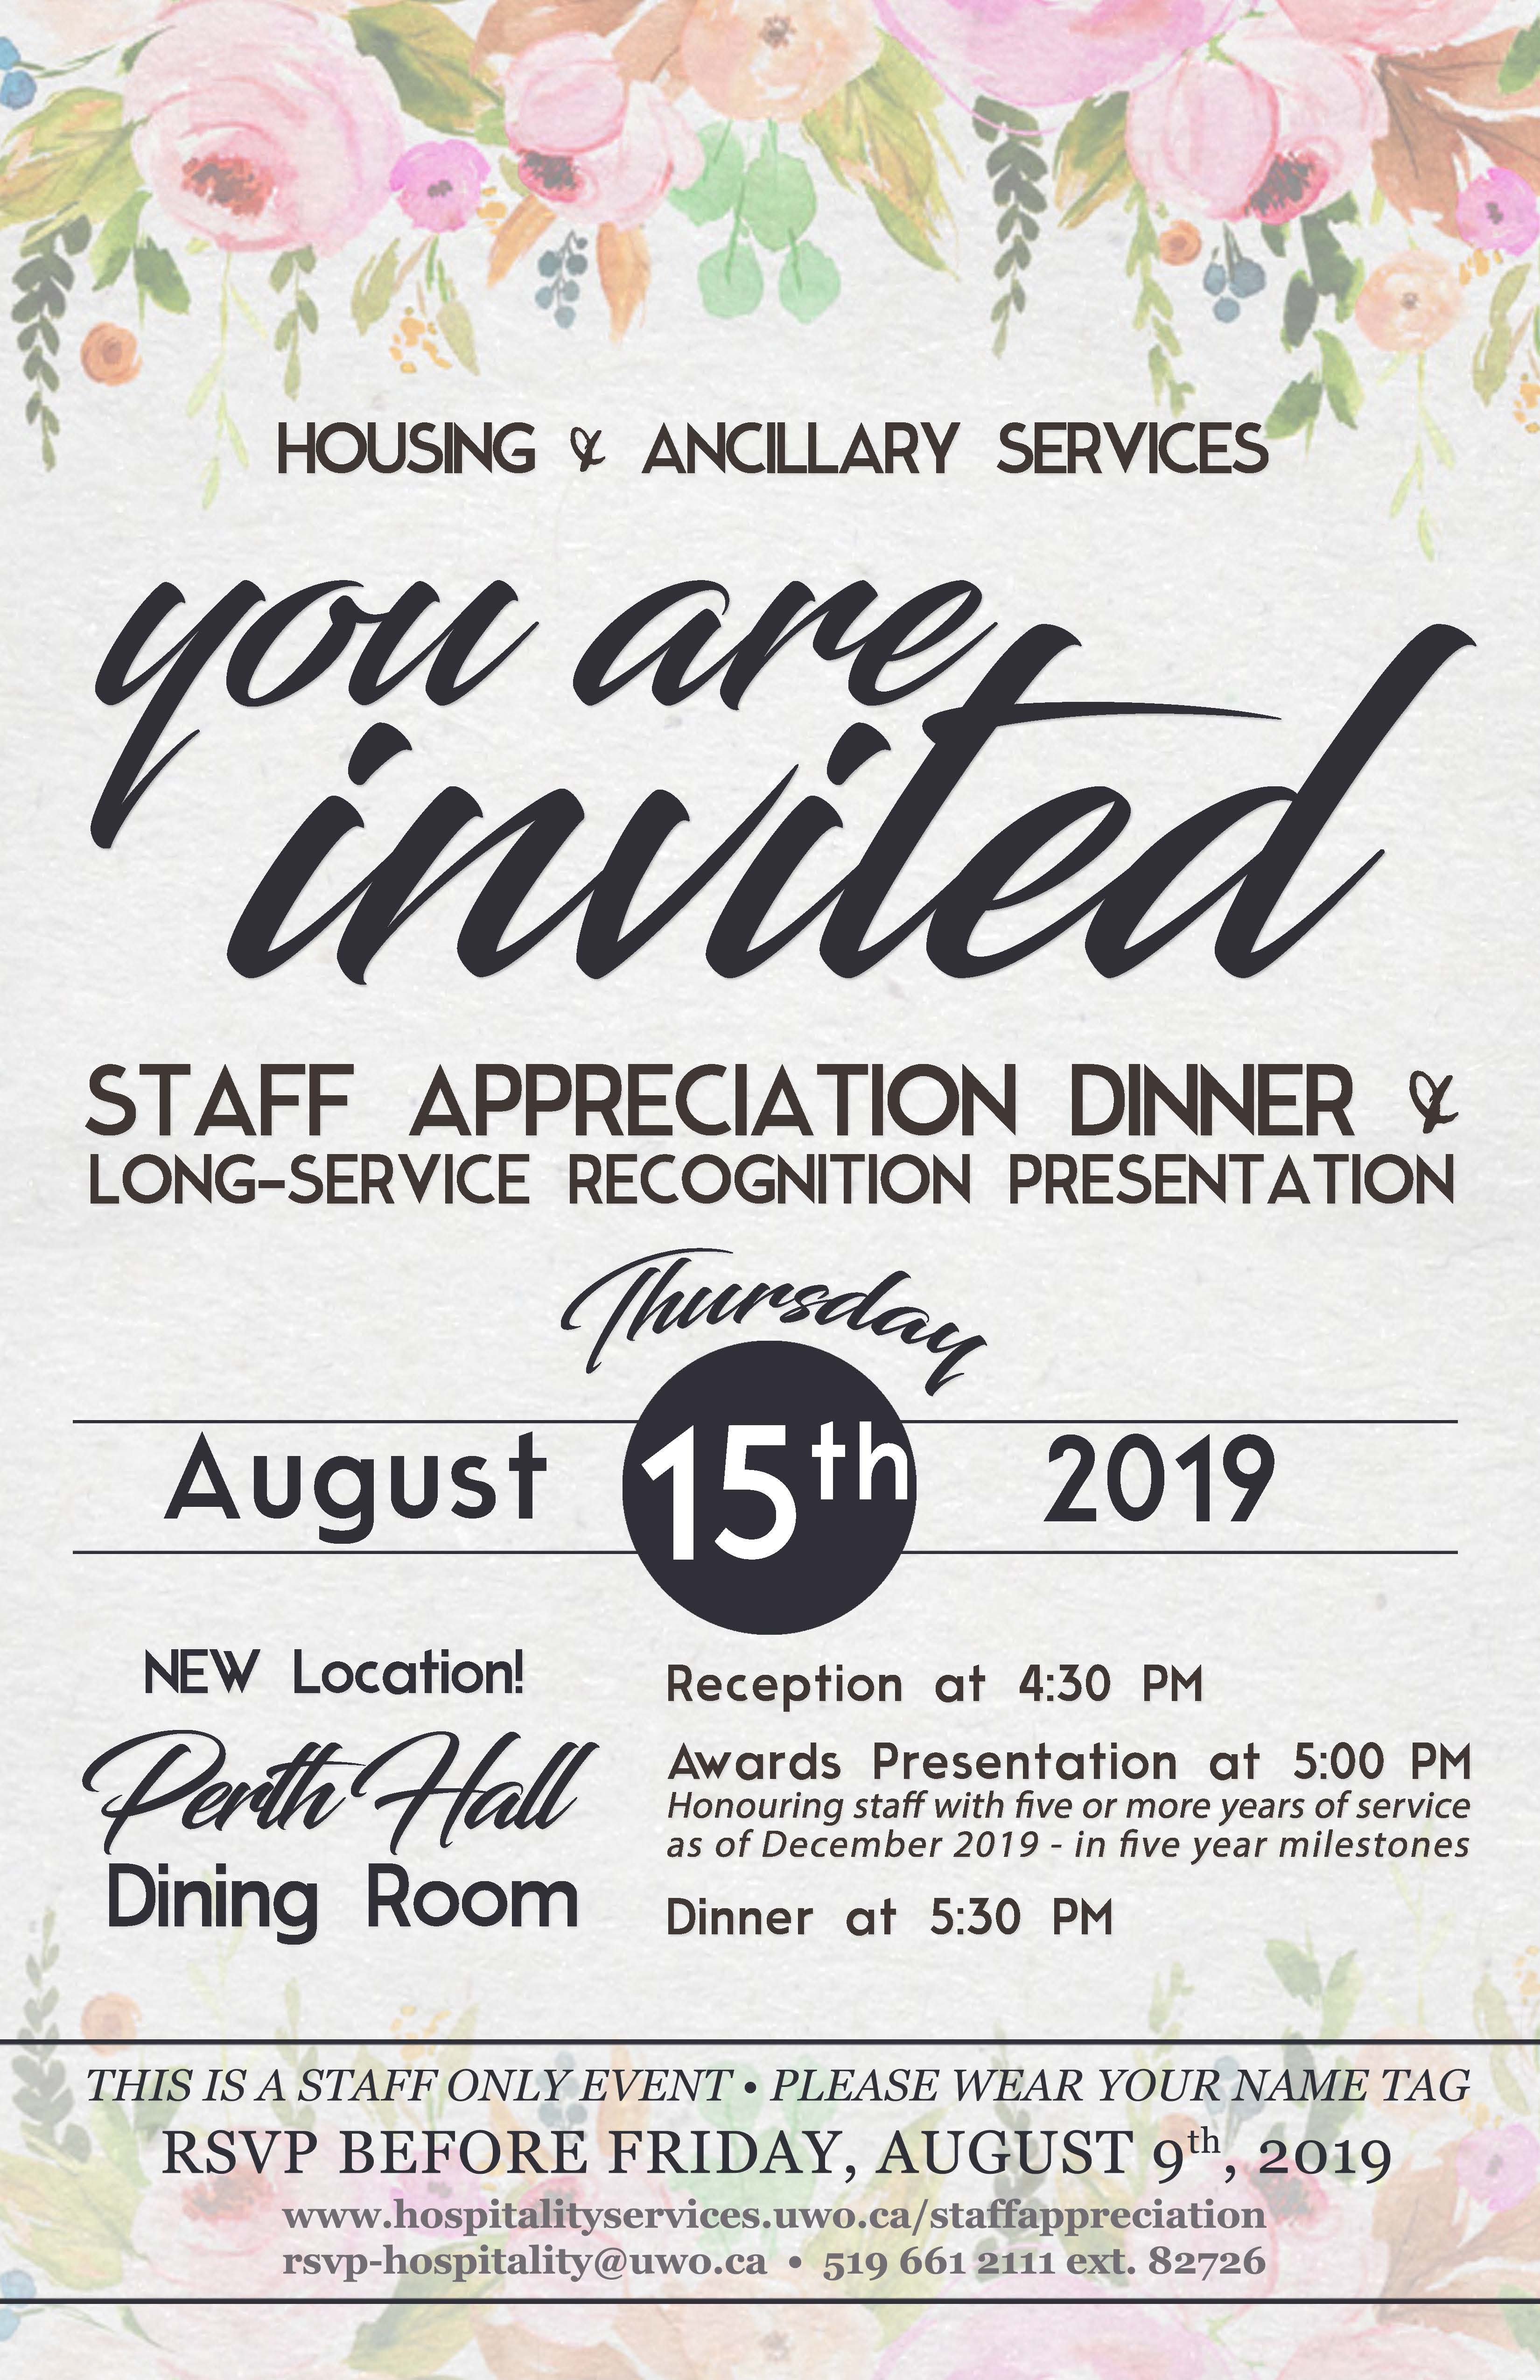 Staff Appreciation Dinner & Long-Service Recognition Presentation on Thursday, August 15, 2019. Ontario Hall Dining Room. Reception at 4:30pm. Awards Presentation at 5pm. Dinner at 5:30pm. This is a staff only event. Please wear your name tag.